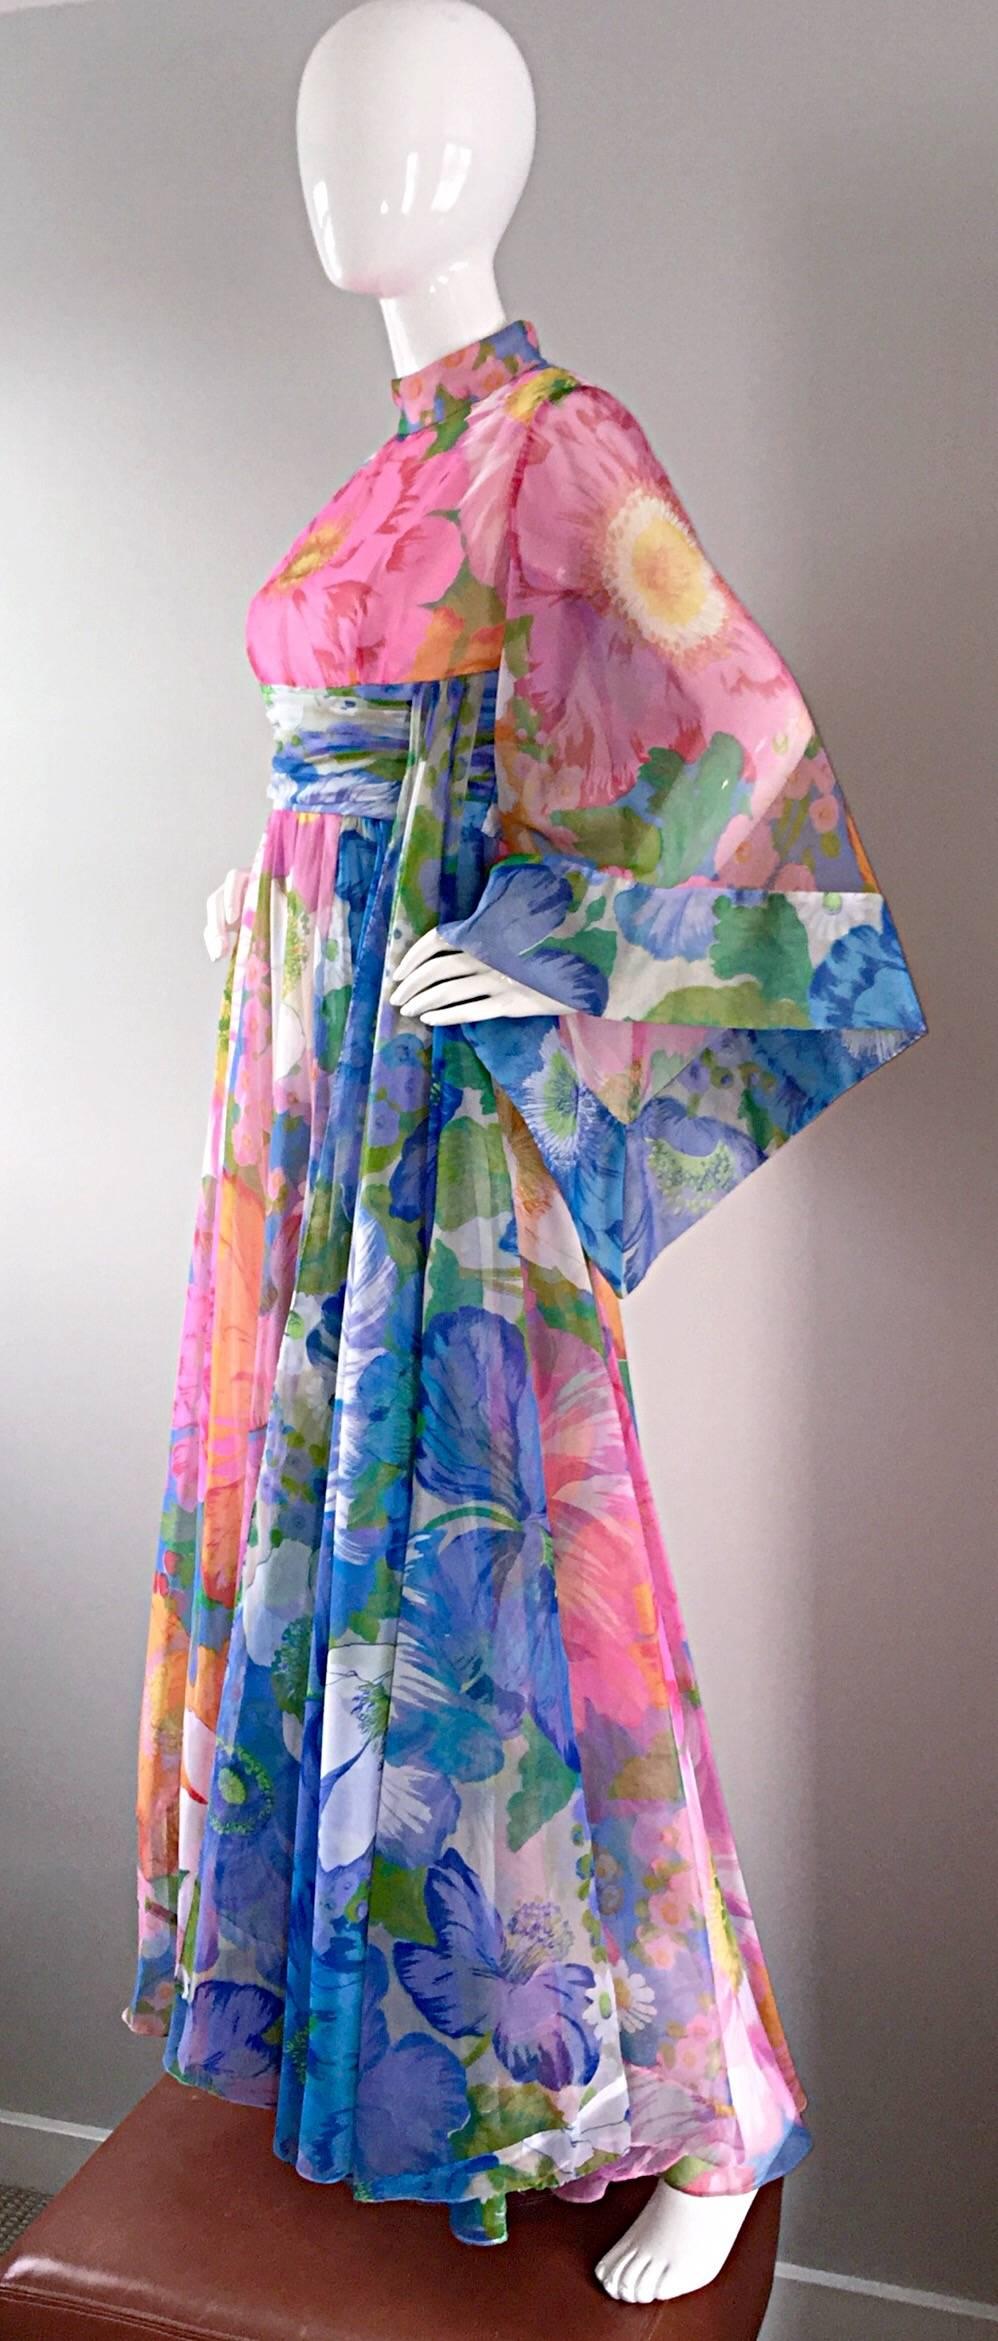 Incredible late 1960s 60s/ Early 70s Mollie Parnis chiffon dress! Features bell scarf sleeves, that are just the right amount of exaggerated! Chic oversized floral print. Fitted bodice, with a full maxi skirt. Contrasting blue floral sash at side.